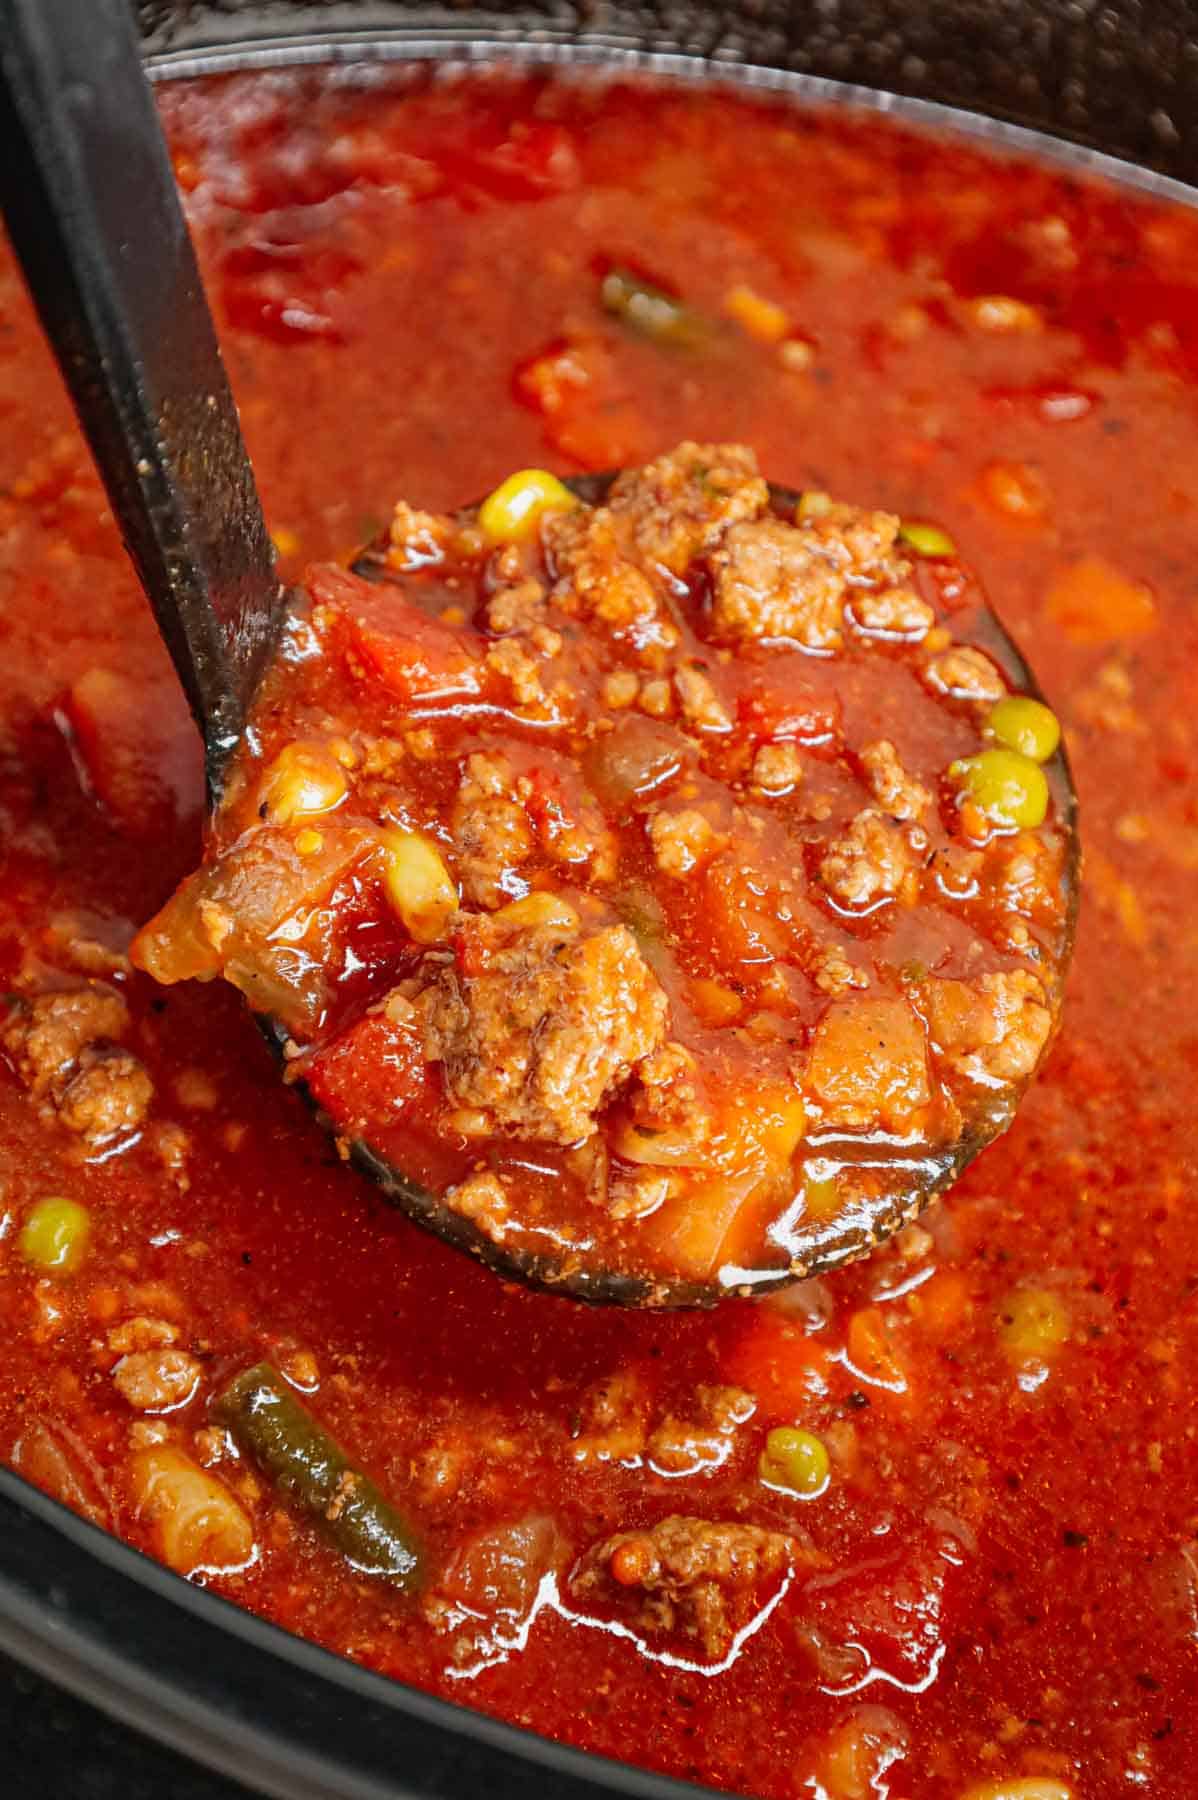 Crock Pot Hamburger Soup is hearty slow cooker dish loaded with ground beef, frozen mixed vegetables, diced tomatoes, tomato sauce and beef broth.